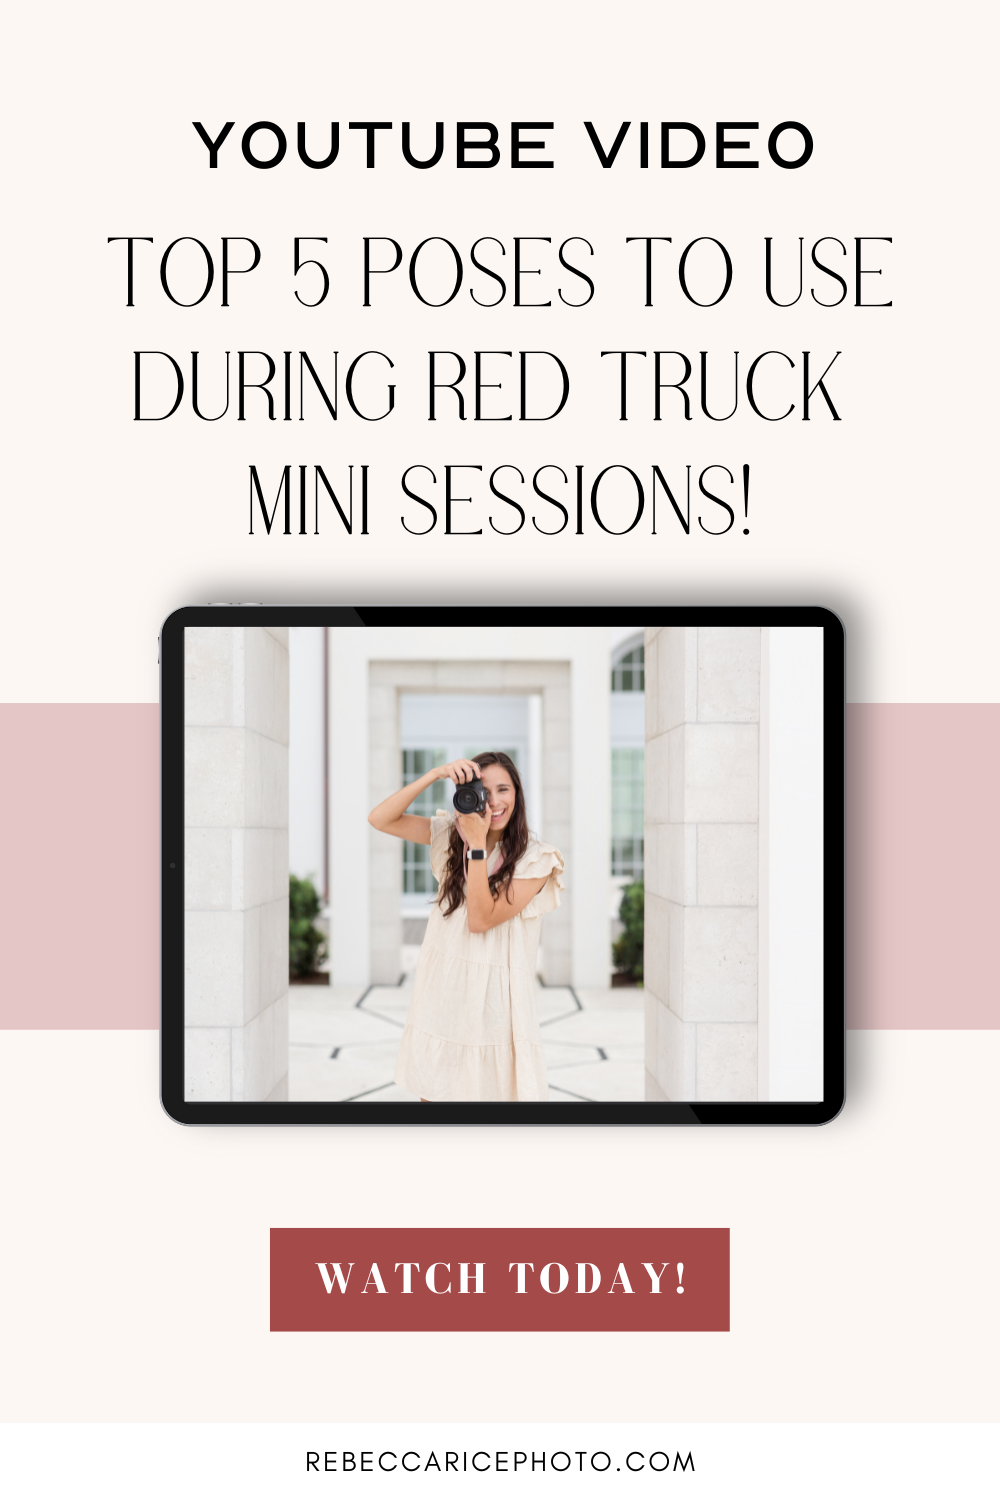 Top 5 Poses to use for Red Truck Minis! Watch on YouTube today! Click to watch NOW! -rebeccaricephoto.com